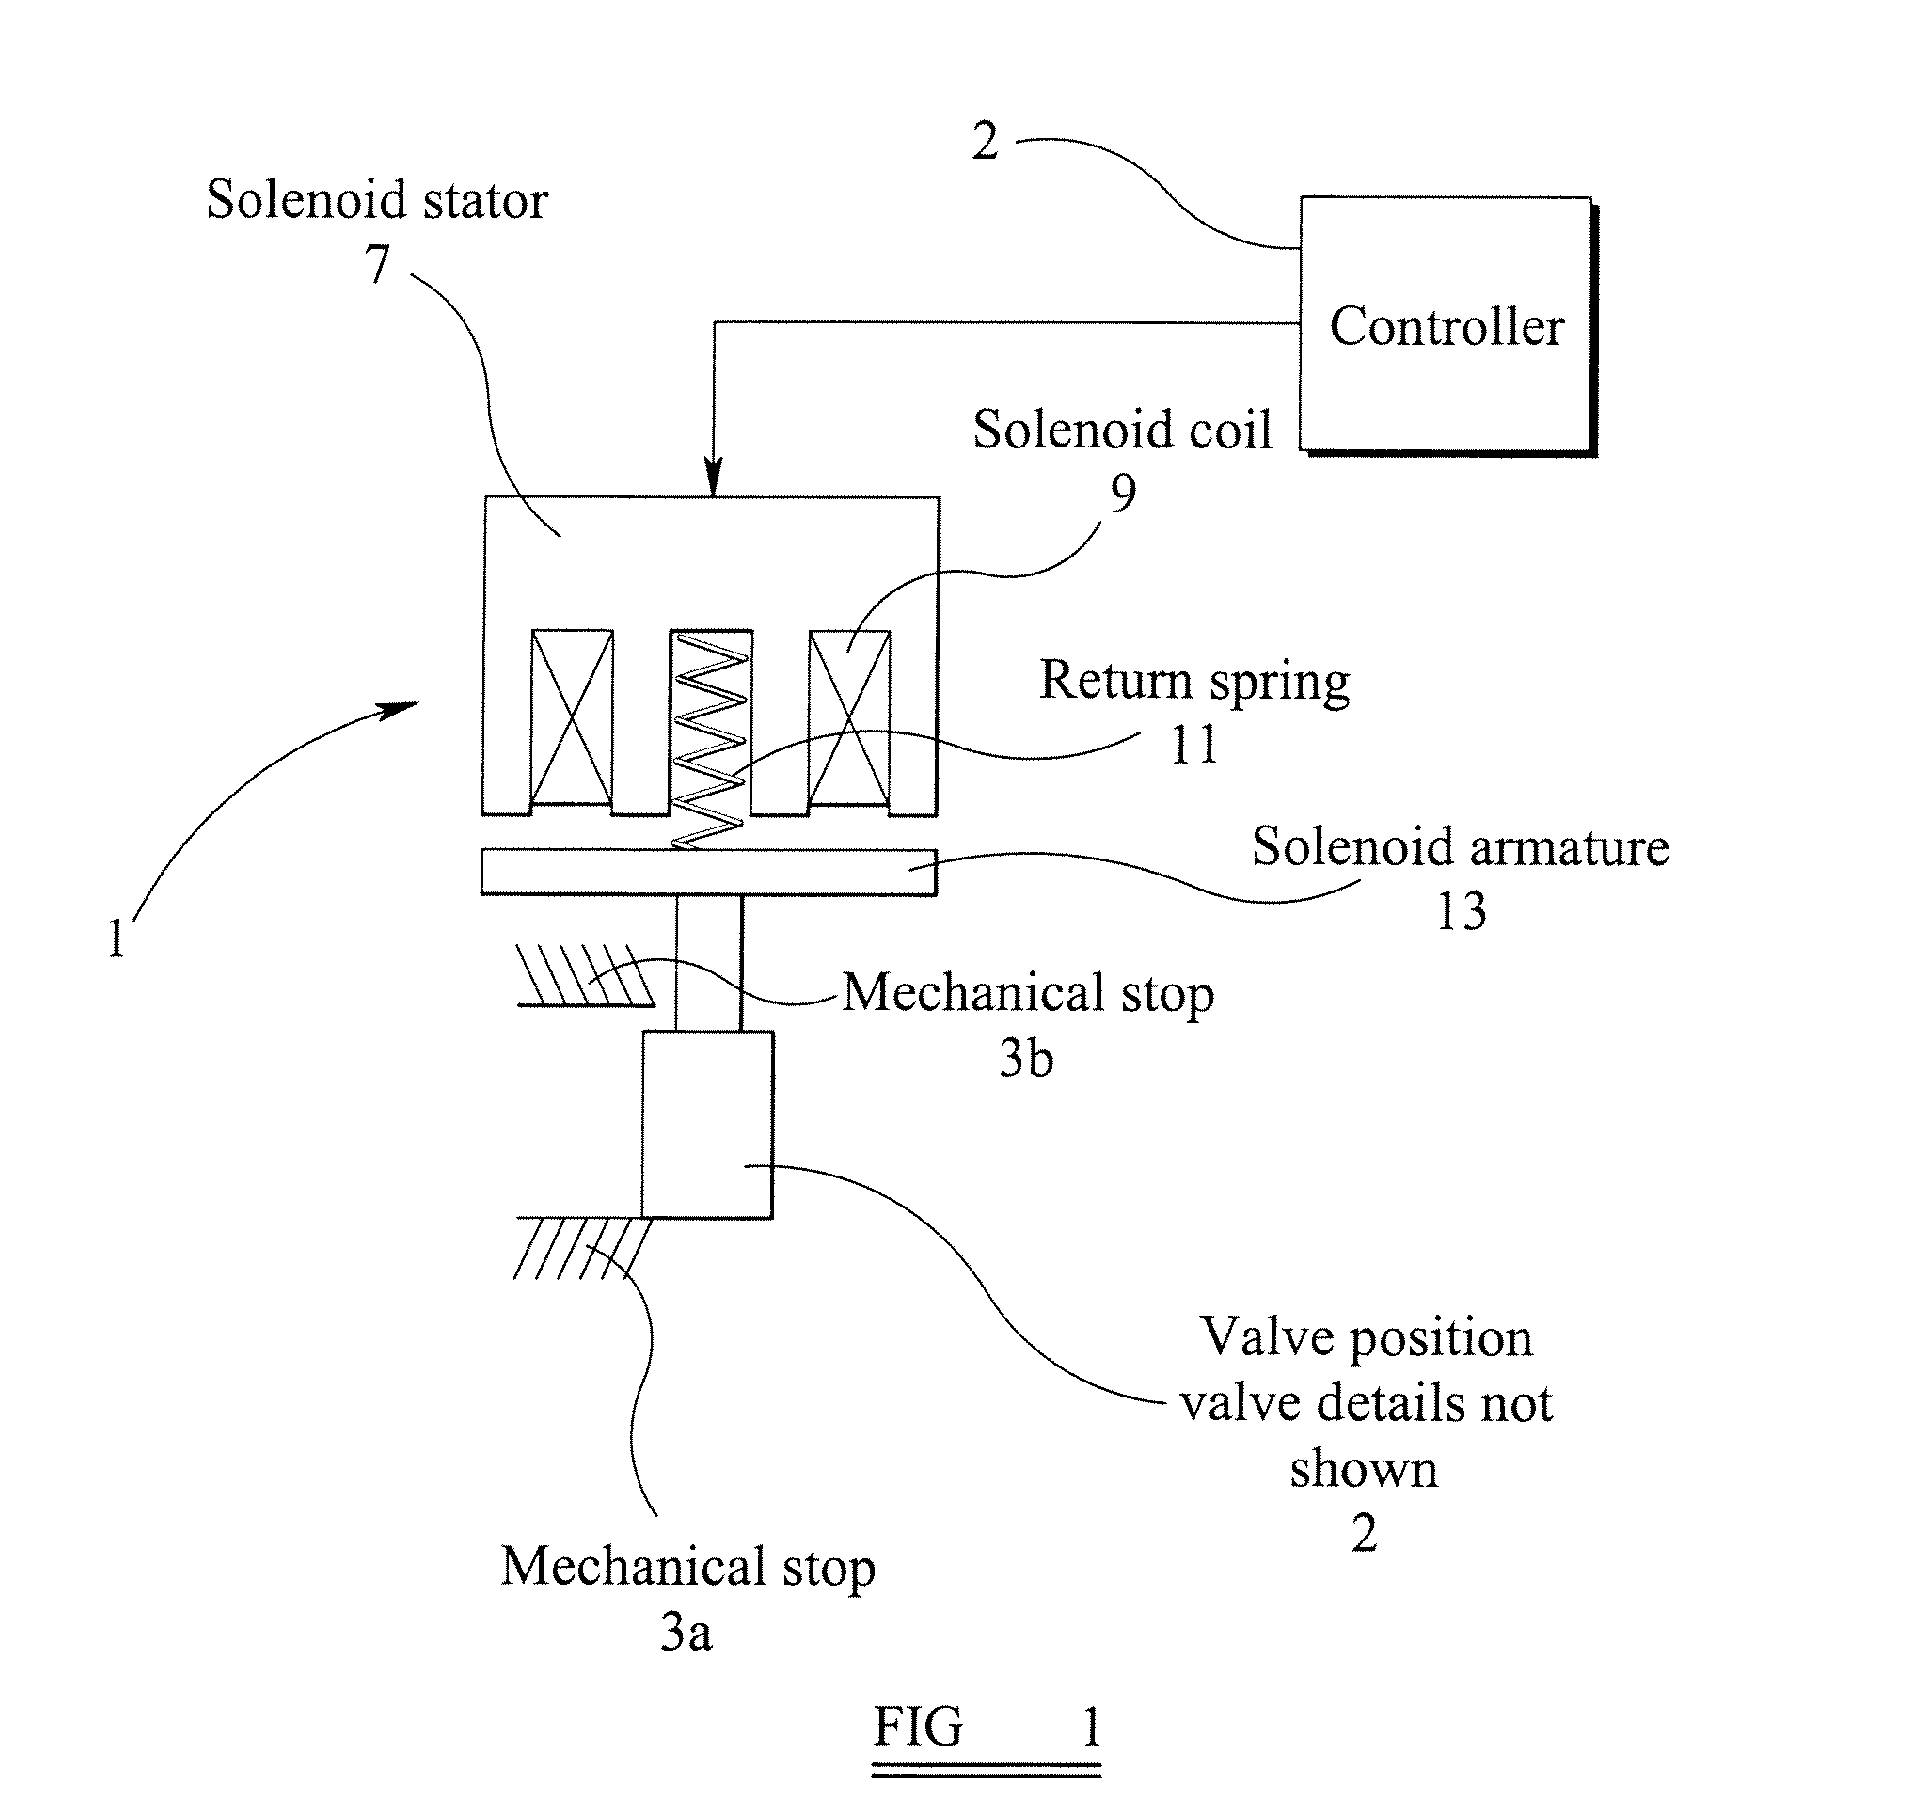 Controller for a Solenoid Operated Valve